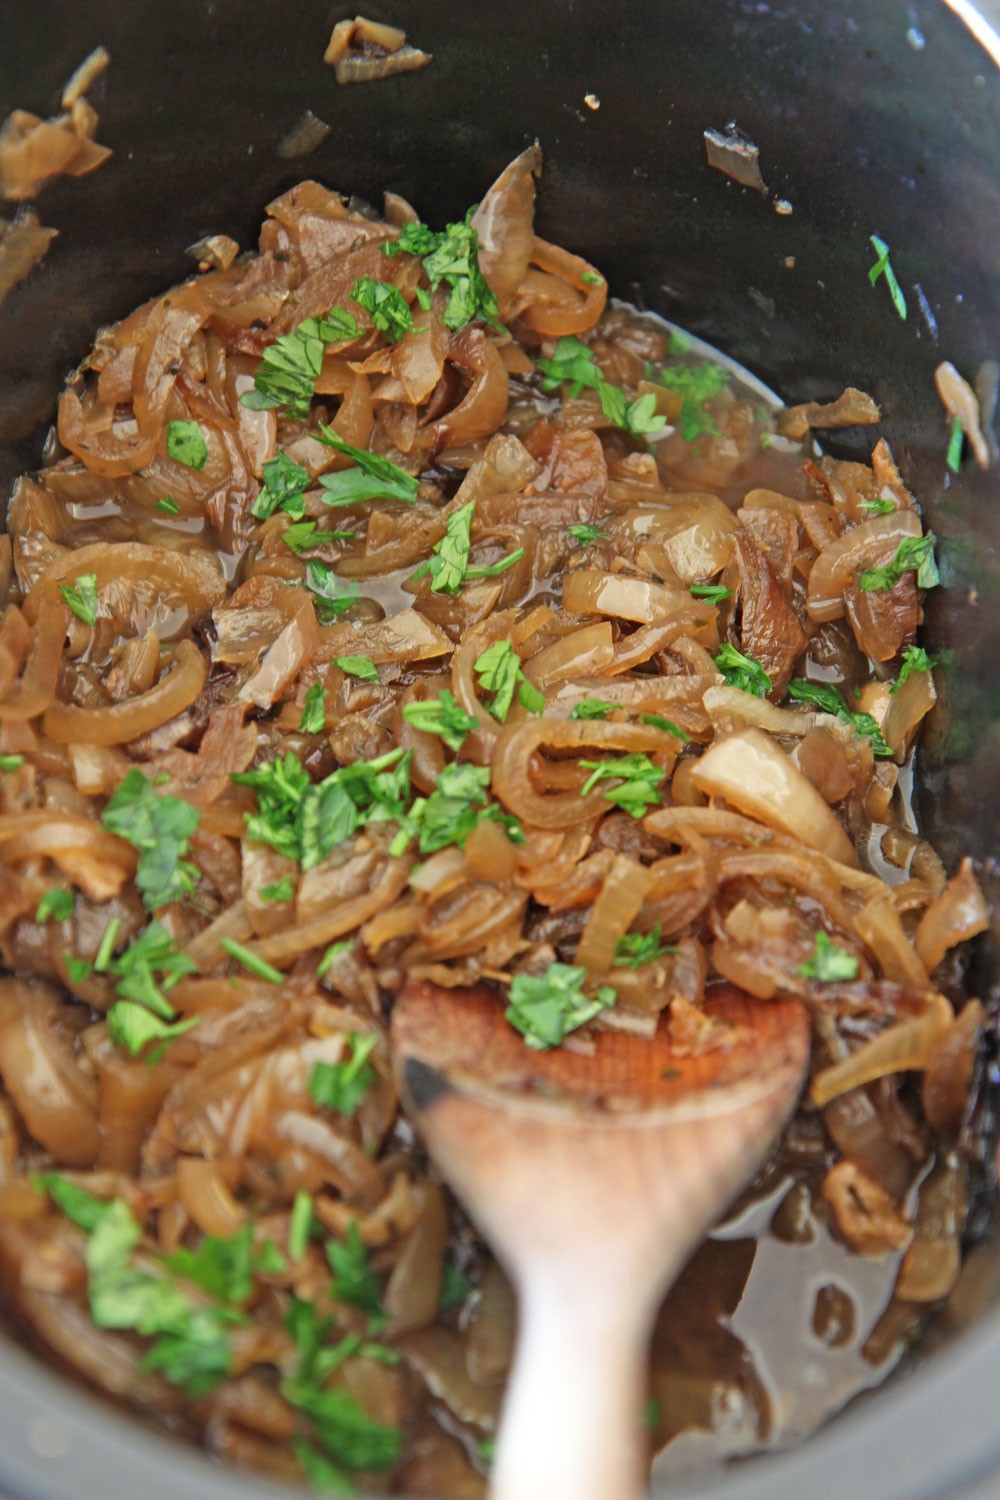 How to Make Slow Cooker Caramelized Onions Recipe. Grab onions, brown sugar, vinegar, garlic, salt and pepper. This is a fun hack that your slow cooker or crock pot does all the work. Happy cooking! www.ChopHappy.com #slowcooker #frenchonionsoup